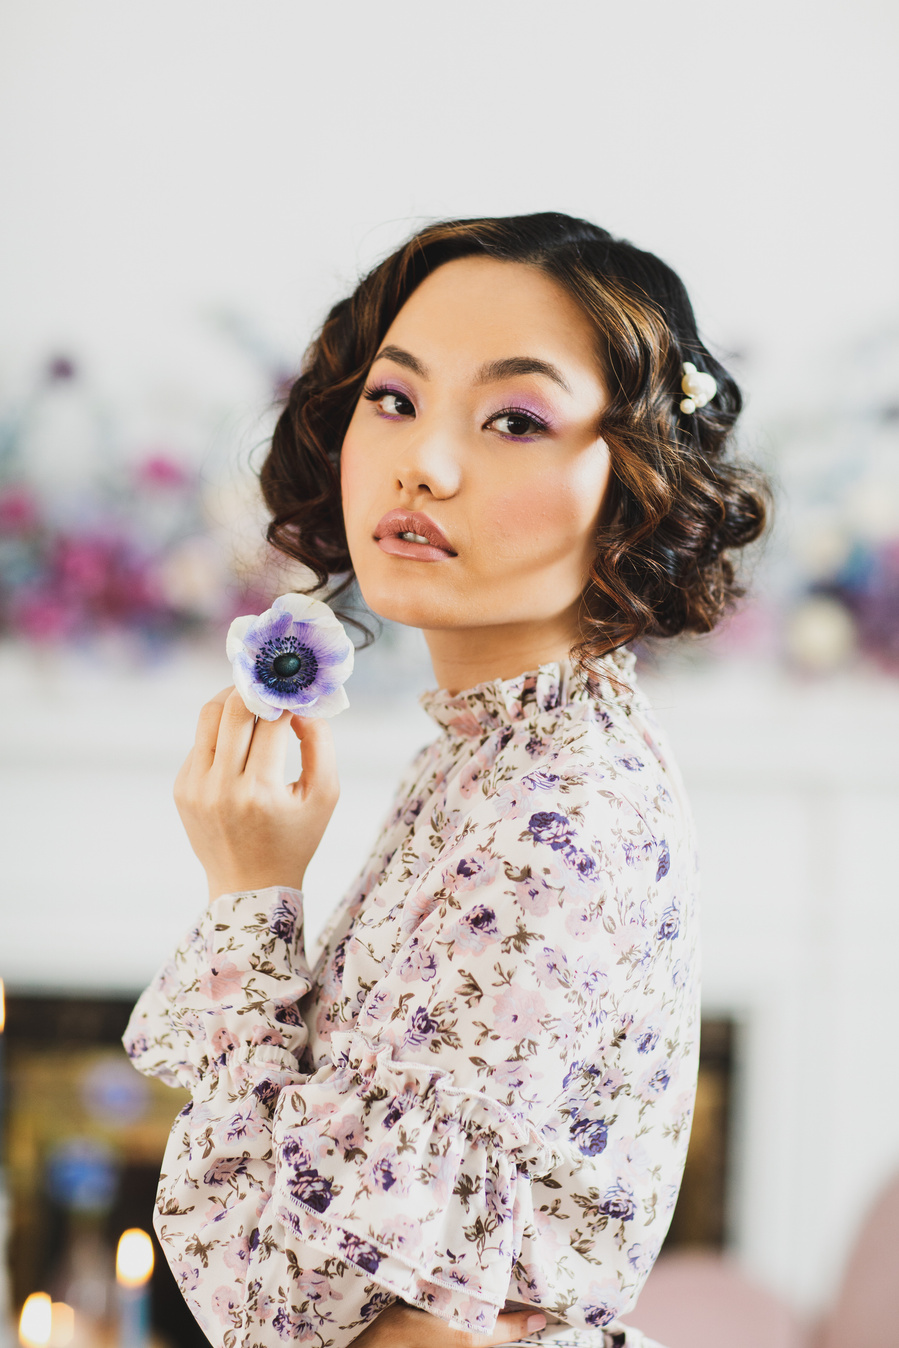 Editorial photography of model with cropped brown curls and a floral blouse looking at the camera, holding a purple flower near her face at a Bridgeton style dessert photography tea party. 